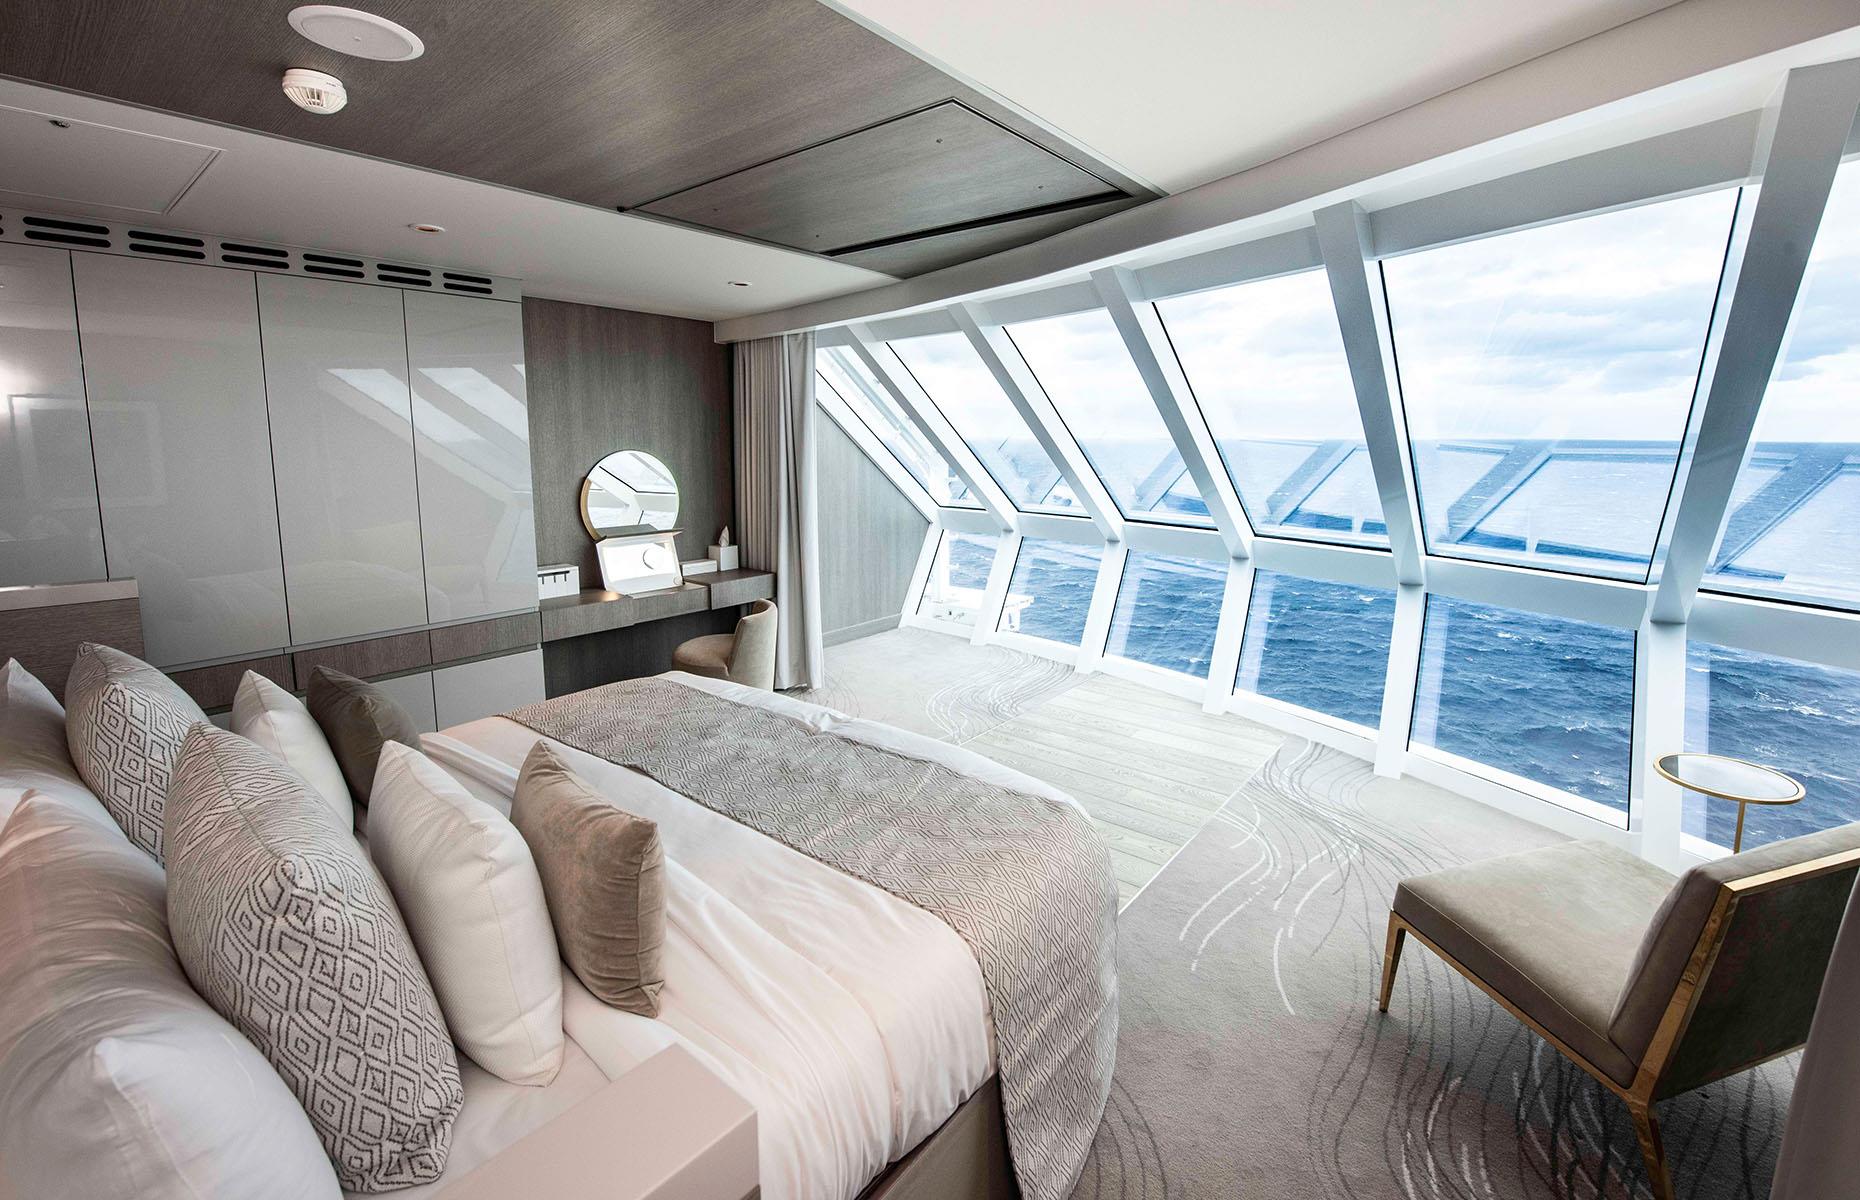 <p>The Iconic Suite is part of The Retreat, an exclusive area of the ship accessible to suite guests. It's home to a sundeck, restaurant and lounge where your butler, along with a team of attendants and concierges, will cater to your every whim. In 2024, Celebrity Edge will visit Hawaii, Alaska, Tahiti and New Zealand and also take in Australia's wine country. A stay in an Iconic Suite on a 13-night cruise around New Zealand costs from around $28.3k per person.</p>